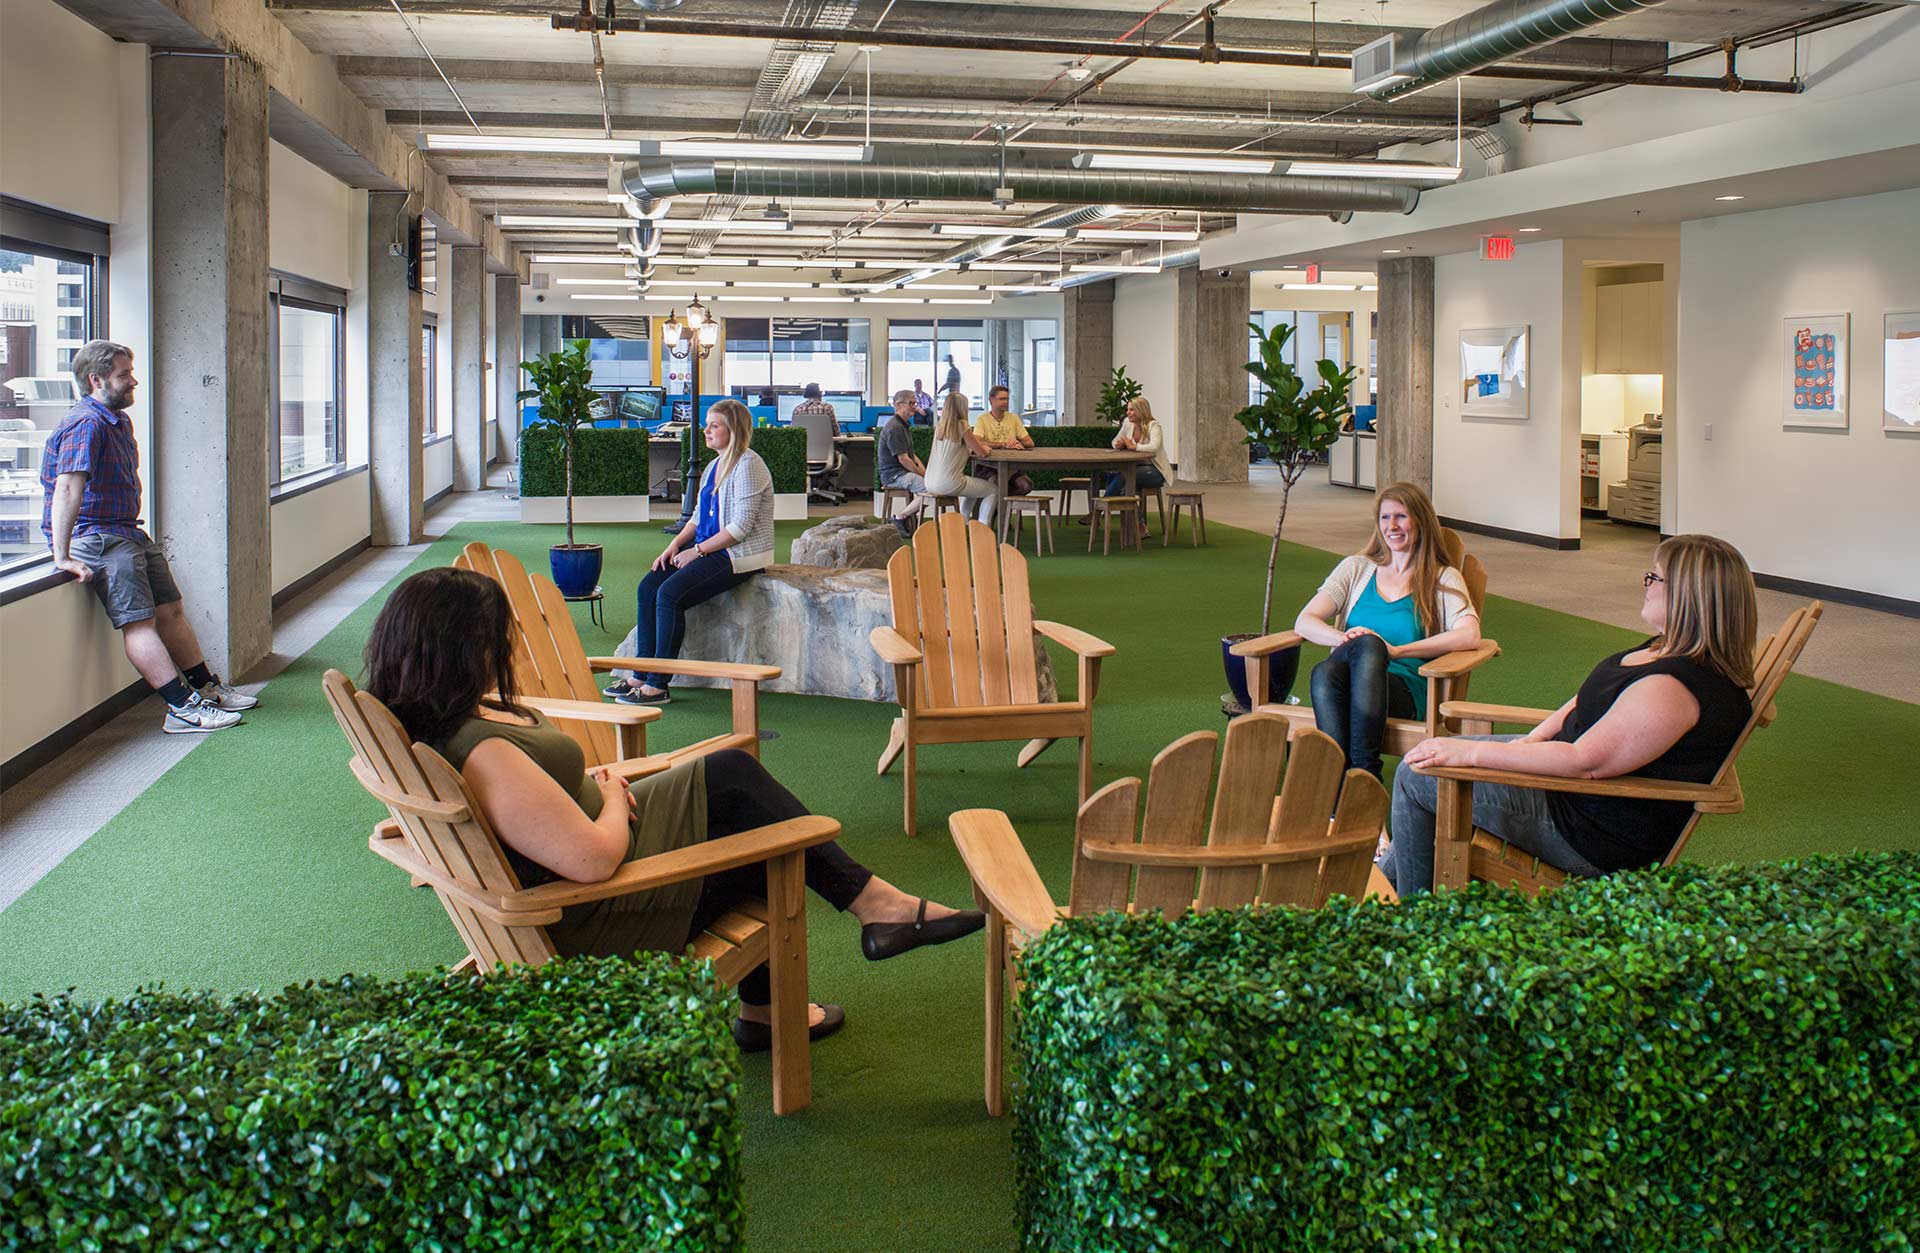 Smarsh office interior seating area with grass and lawn chairs